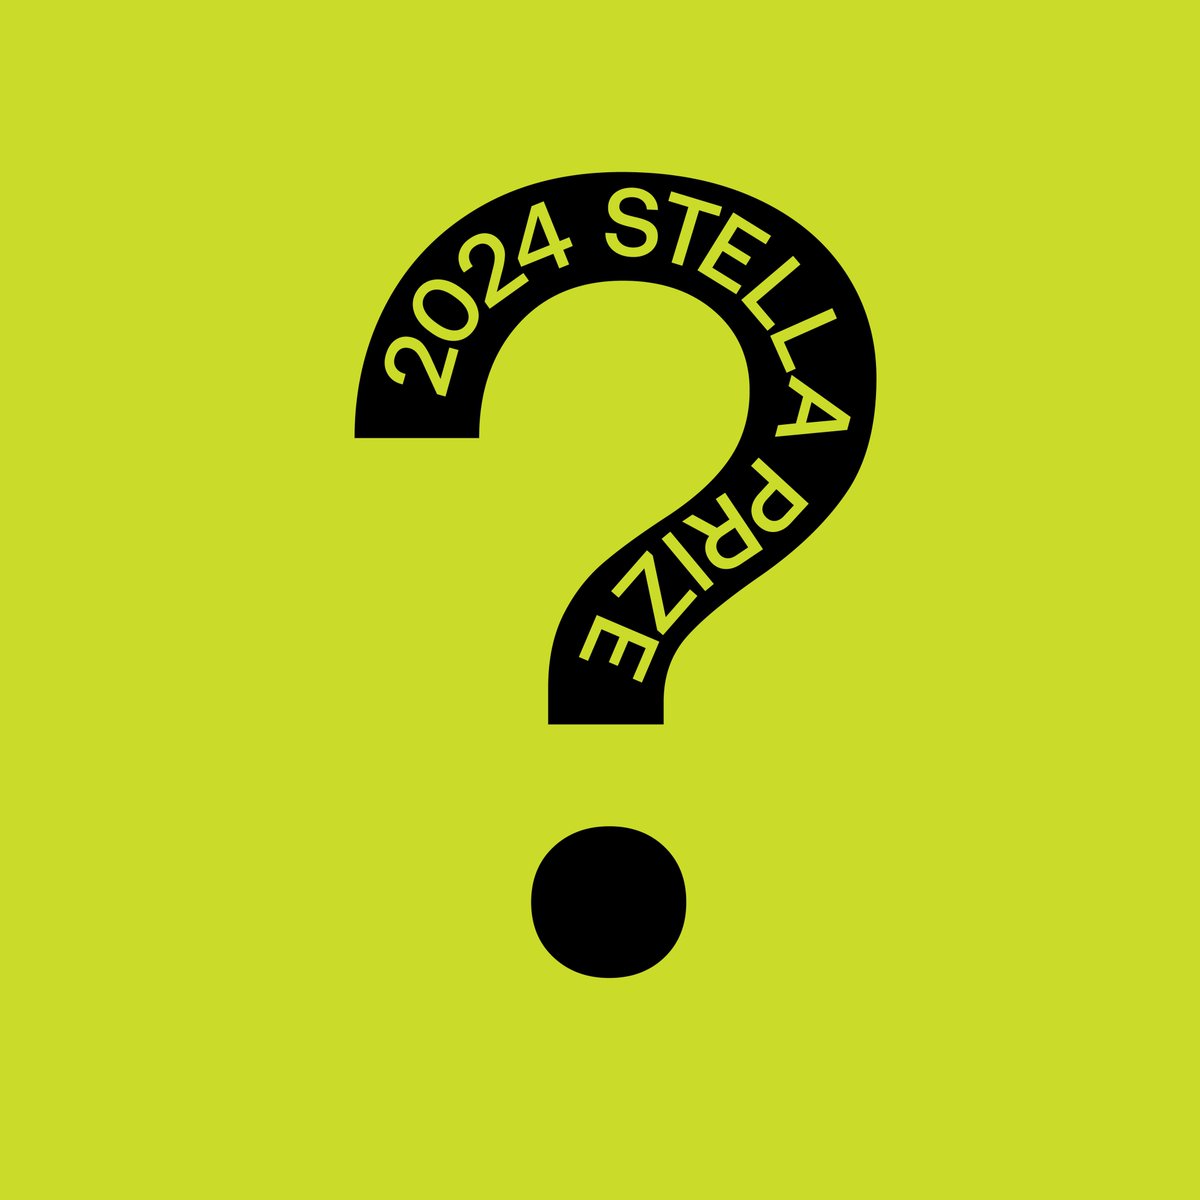 TODAY Stella will reveal the winner of the #2024stellprize! Join us at 7:30pm (AEST): bit.ly/4bgNtQM